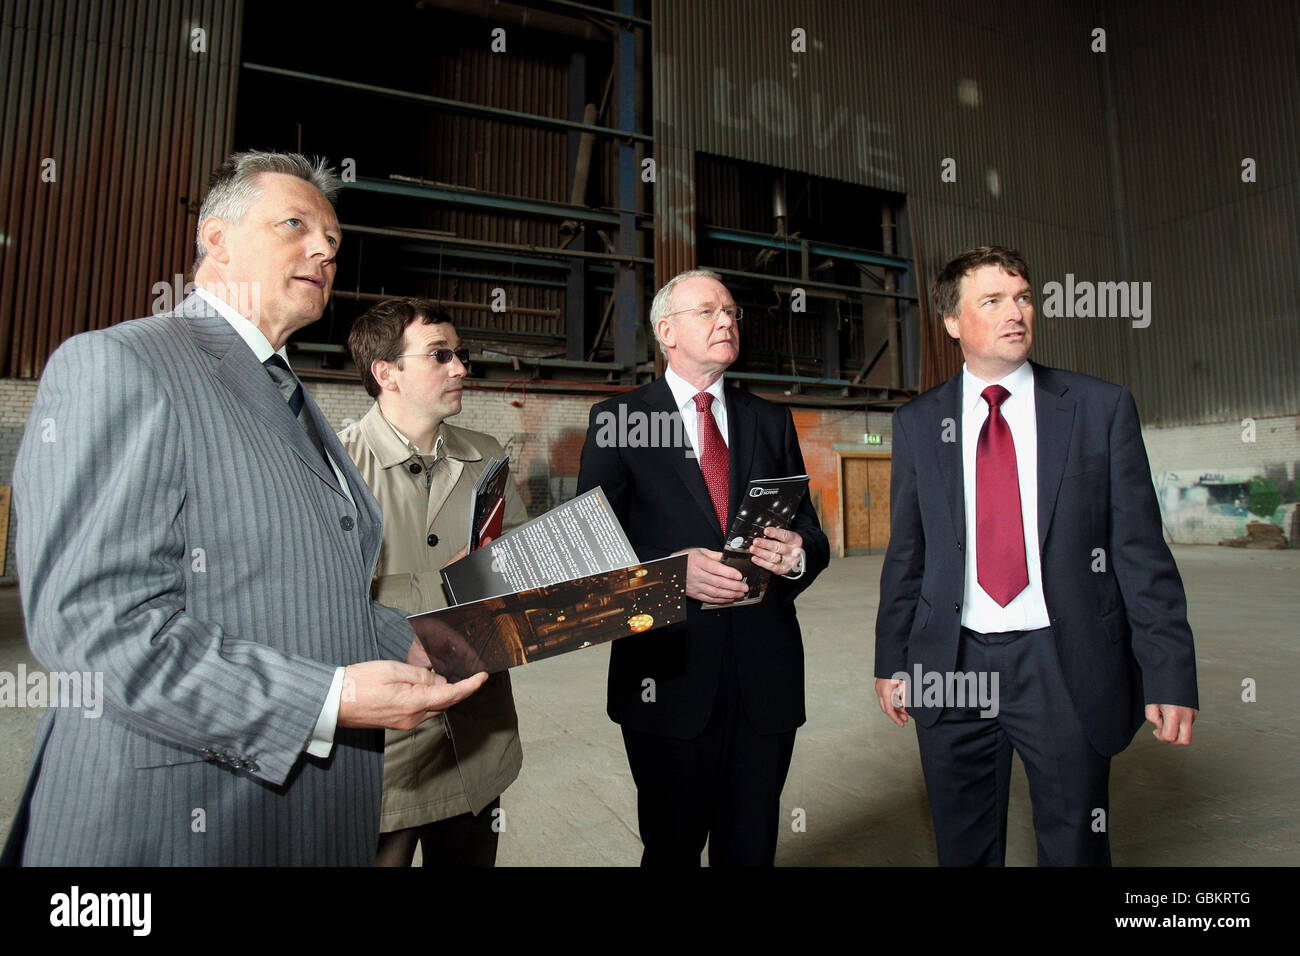 First Minister Peter Robinson (left) with Deputy First Minister Martin McGuinness (second right) with Andrew Reid (second left) and Rick Hill (right) from Northern Ireland Screen, tour the paint factory in the Titanic quarter of Belfast, which has been used as a film location. Stock Photo